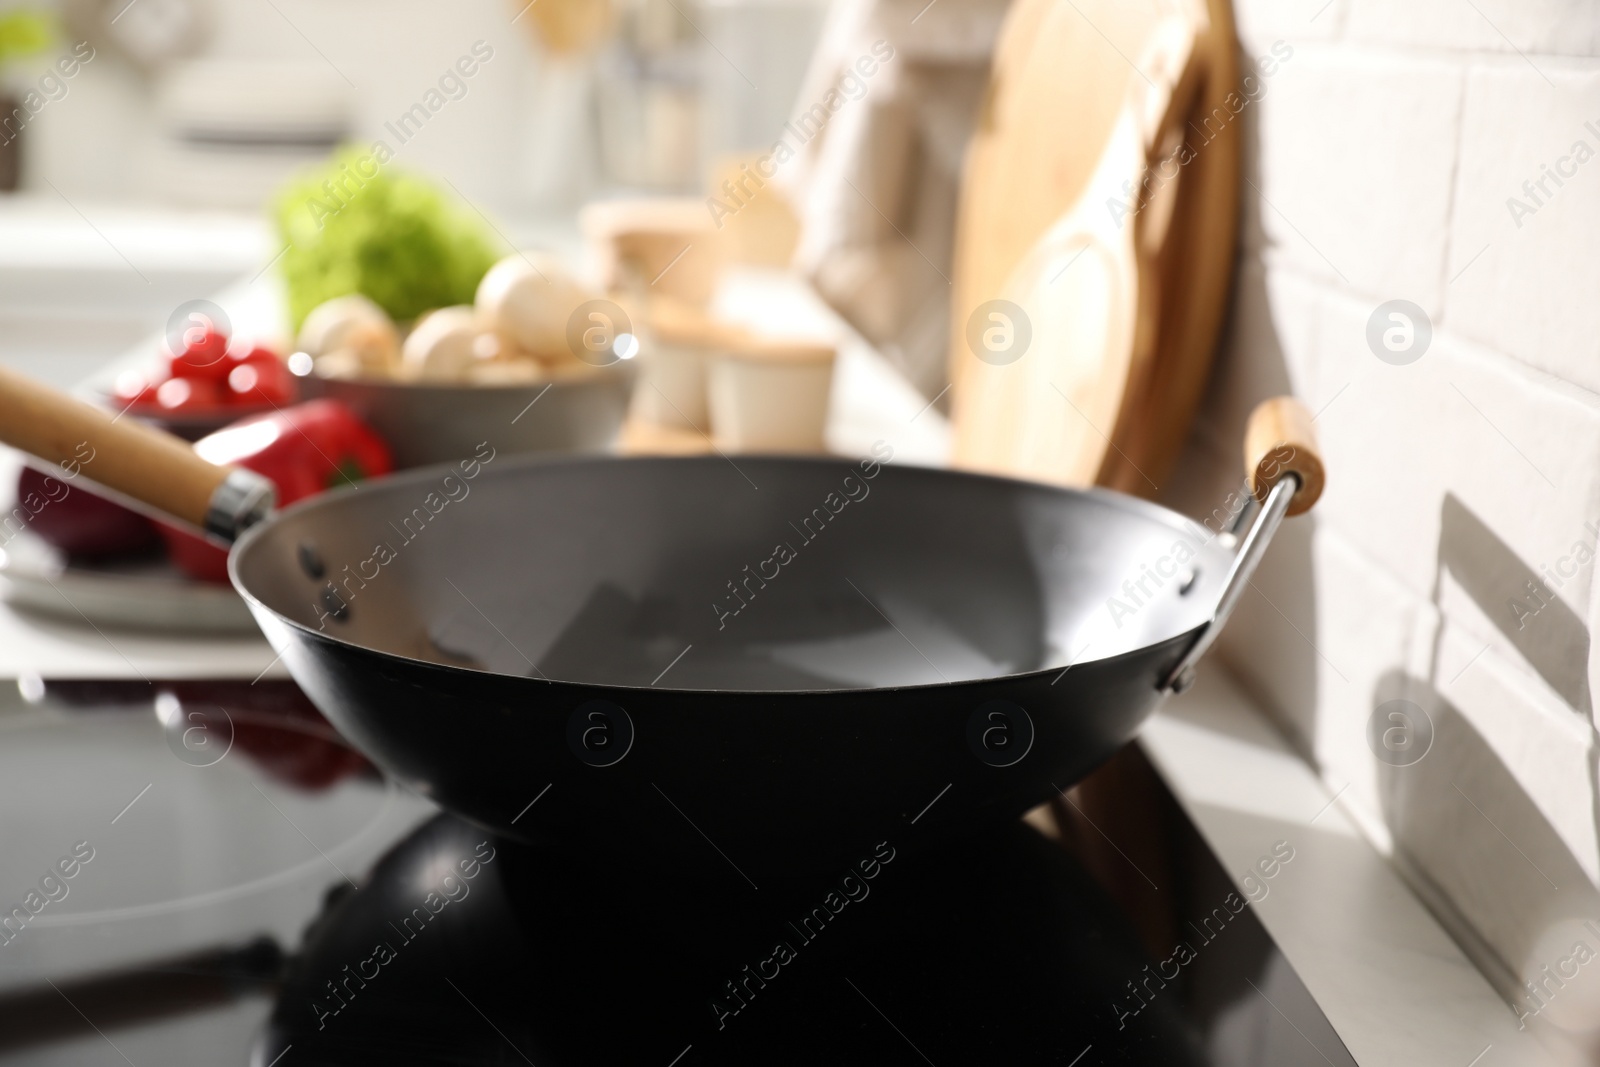 Photo of Frying pan on modern cooktop in kitchen